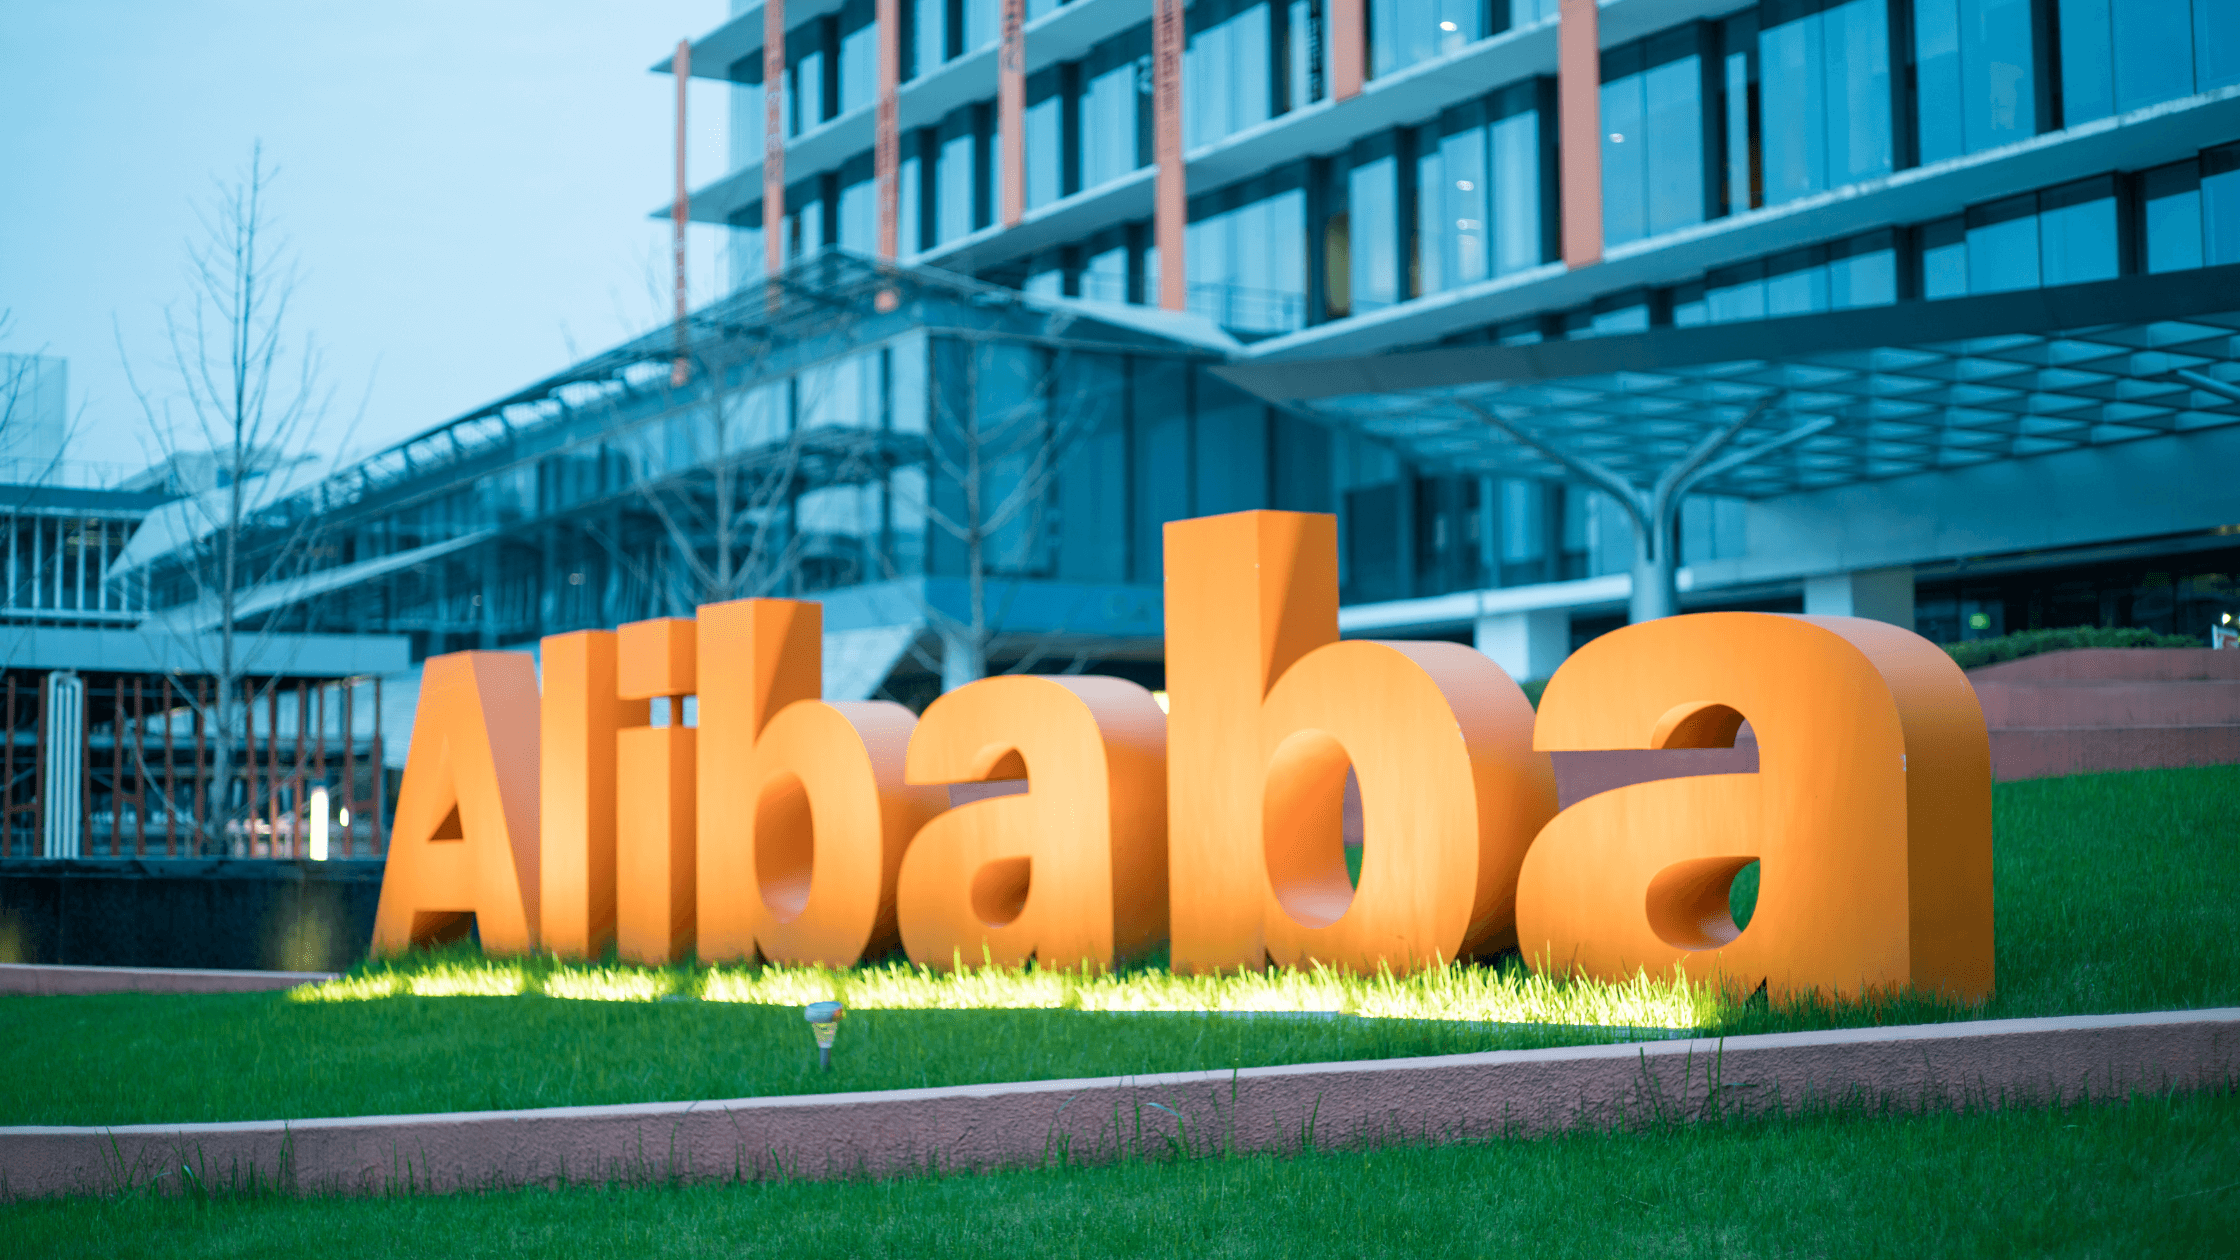 Alibaba’s Cloud Business: Is it a “Young Amazon”?